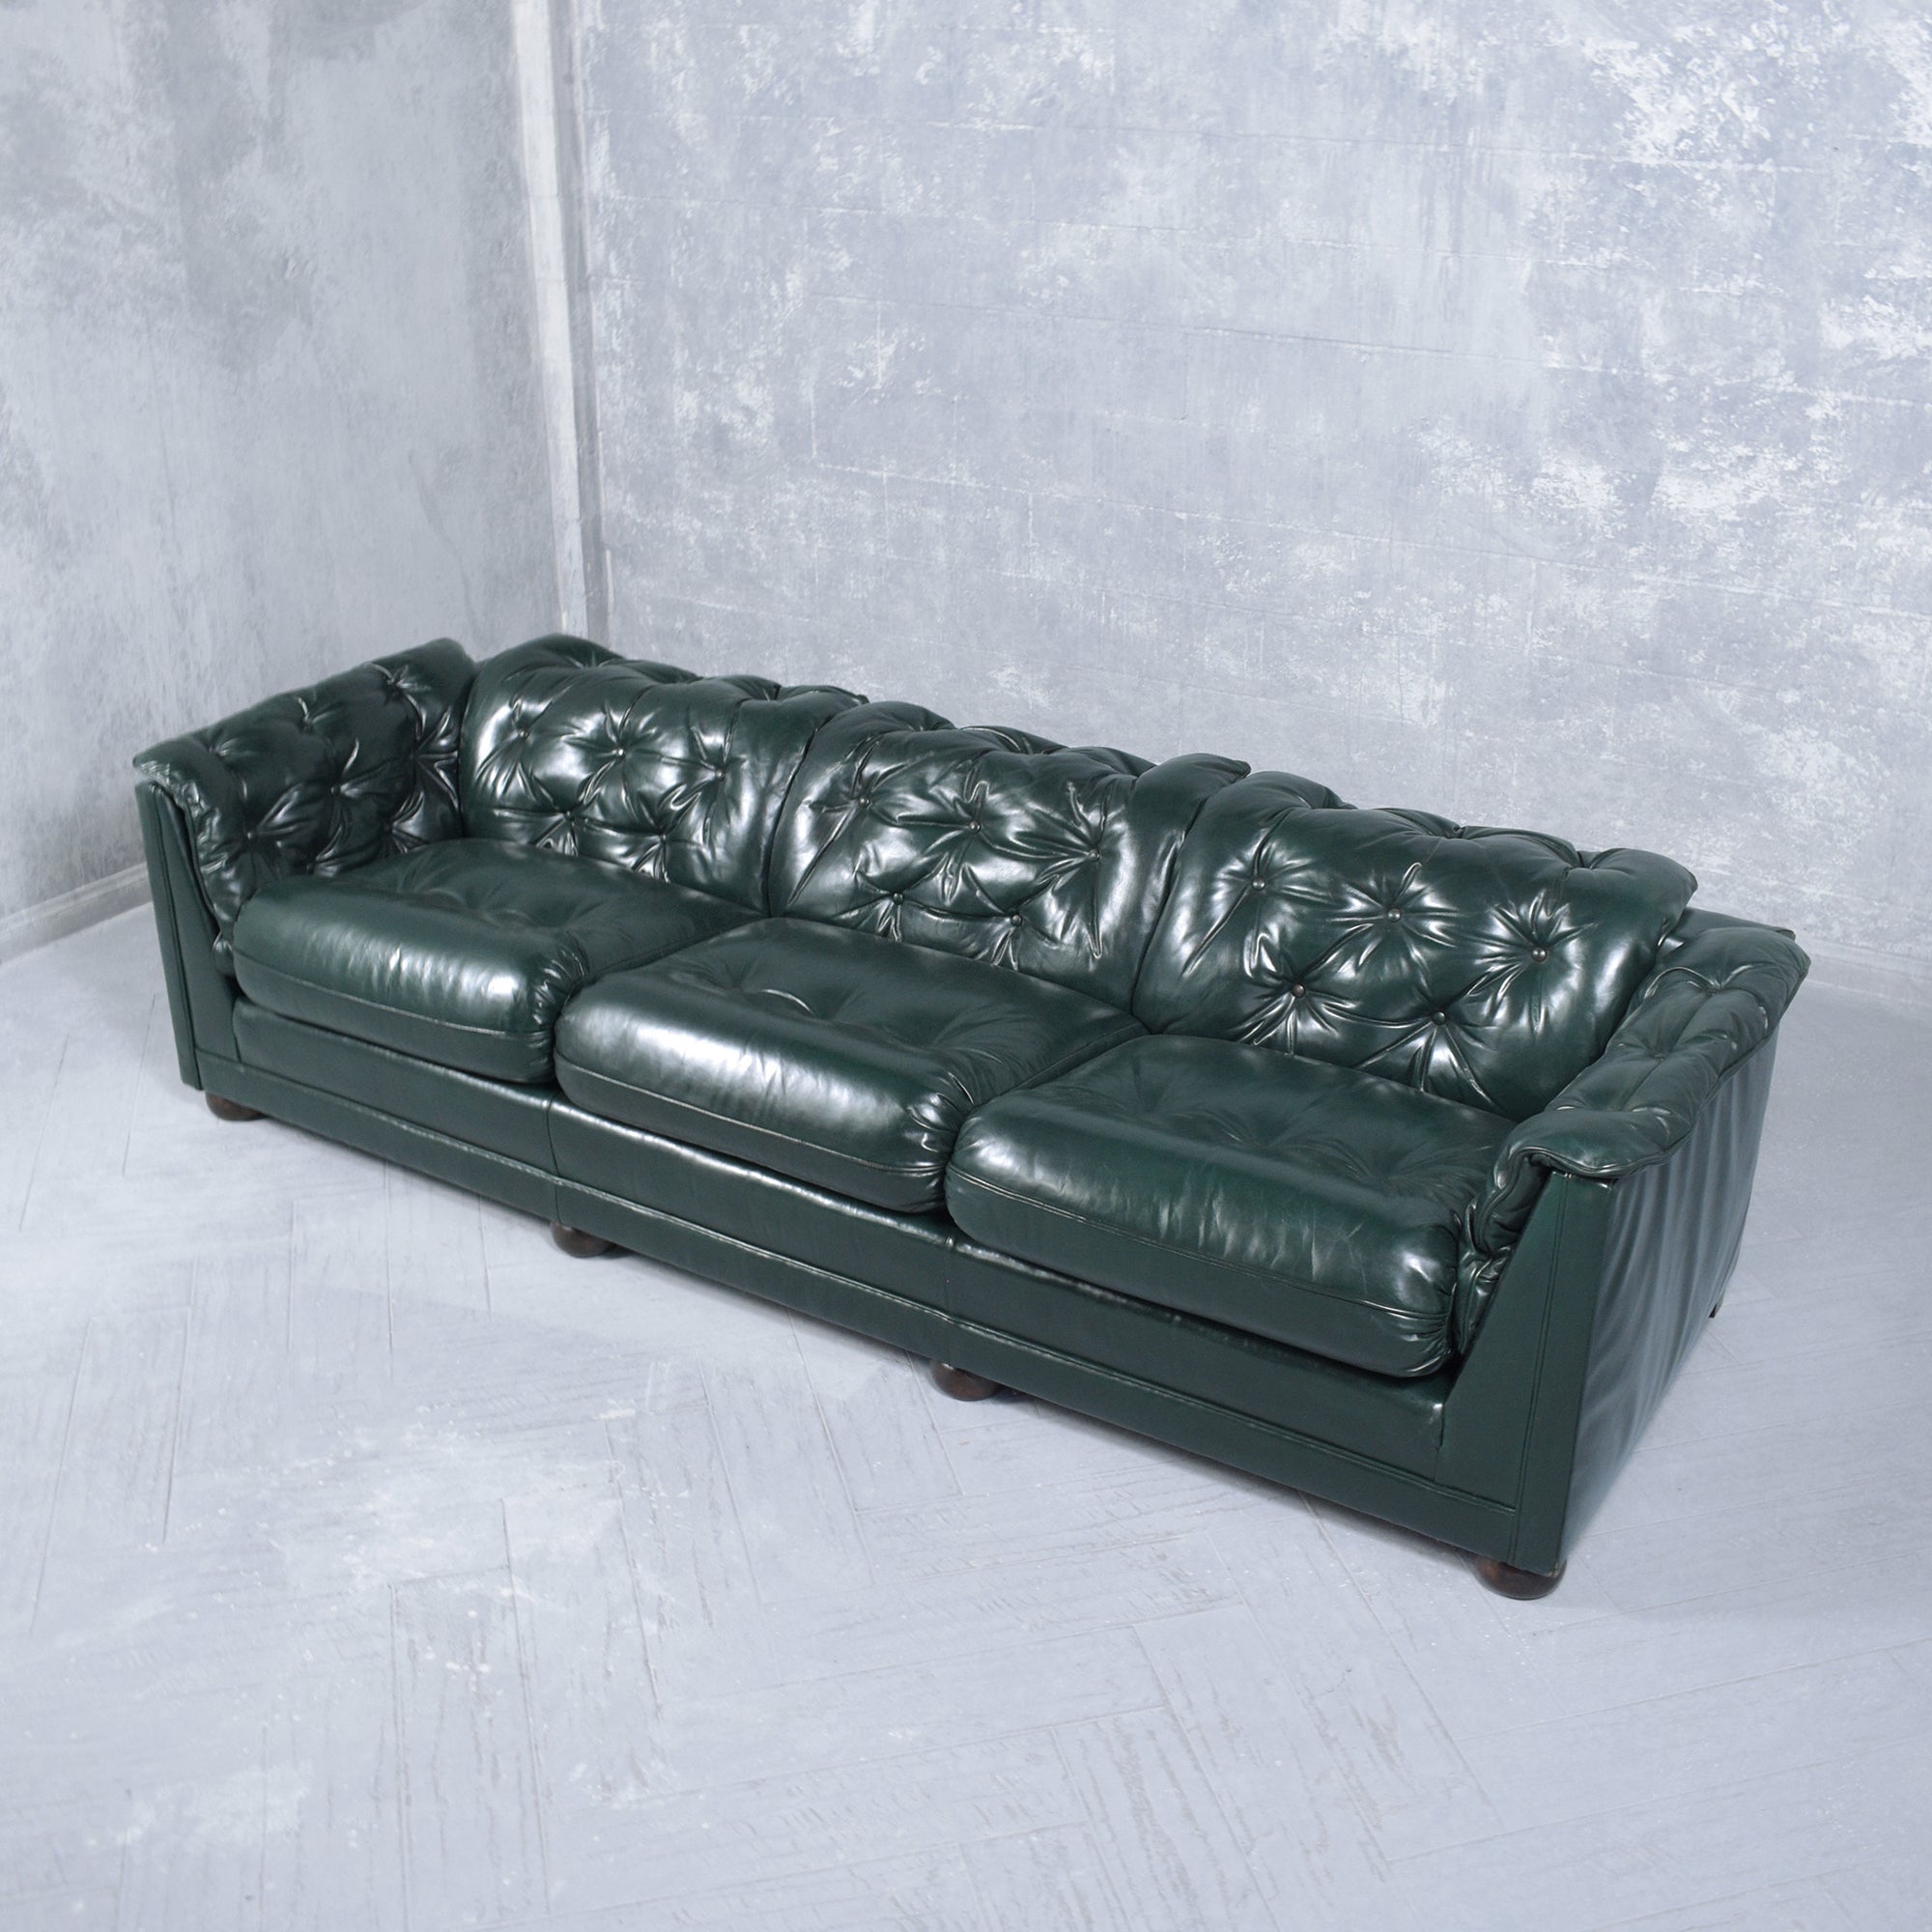 European 1960s Vintage Emerald Green Tufted Chesterfield Leather Sofa